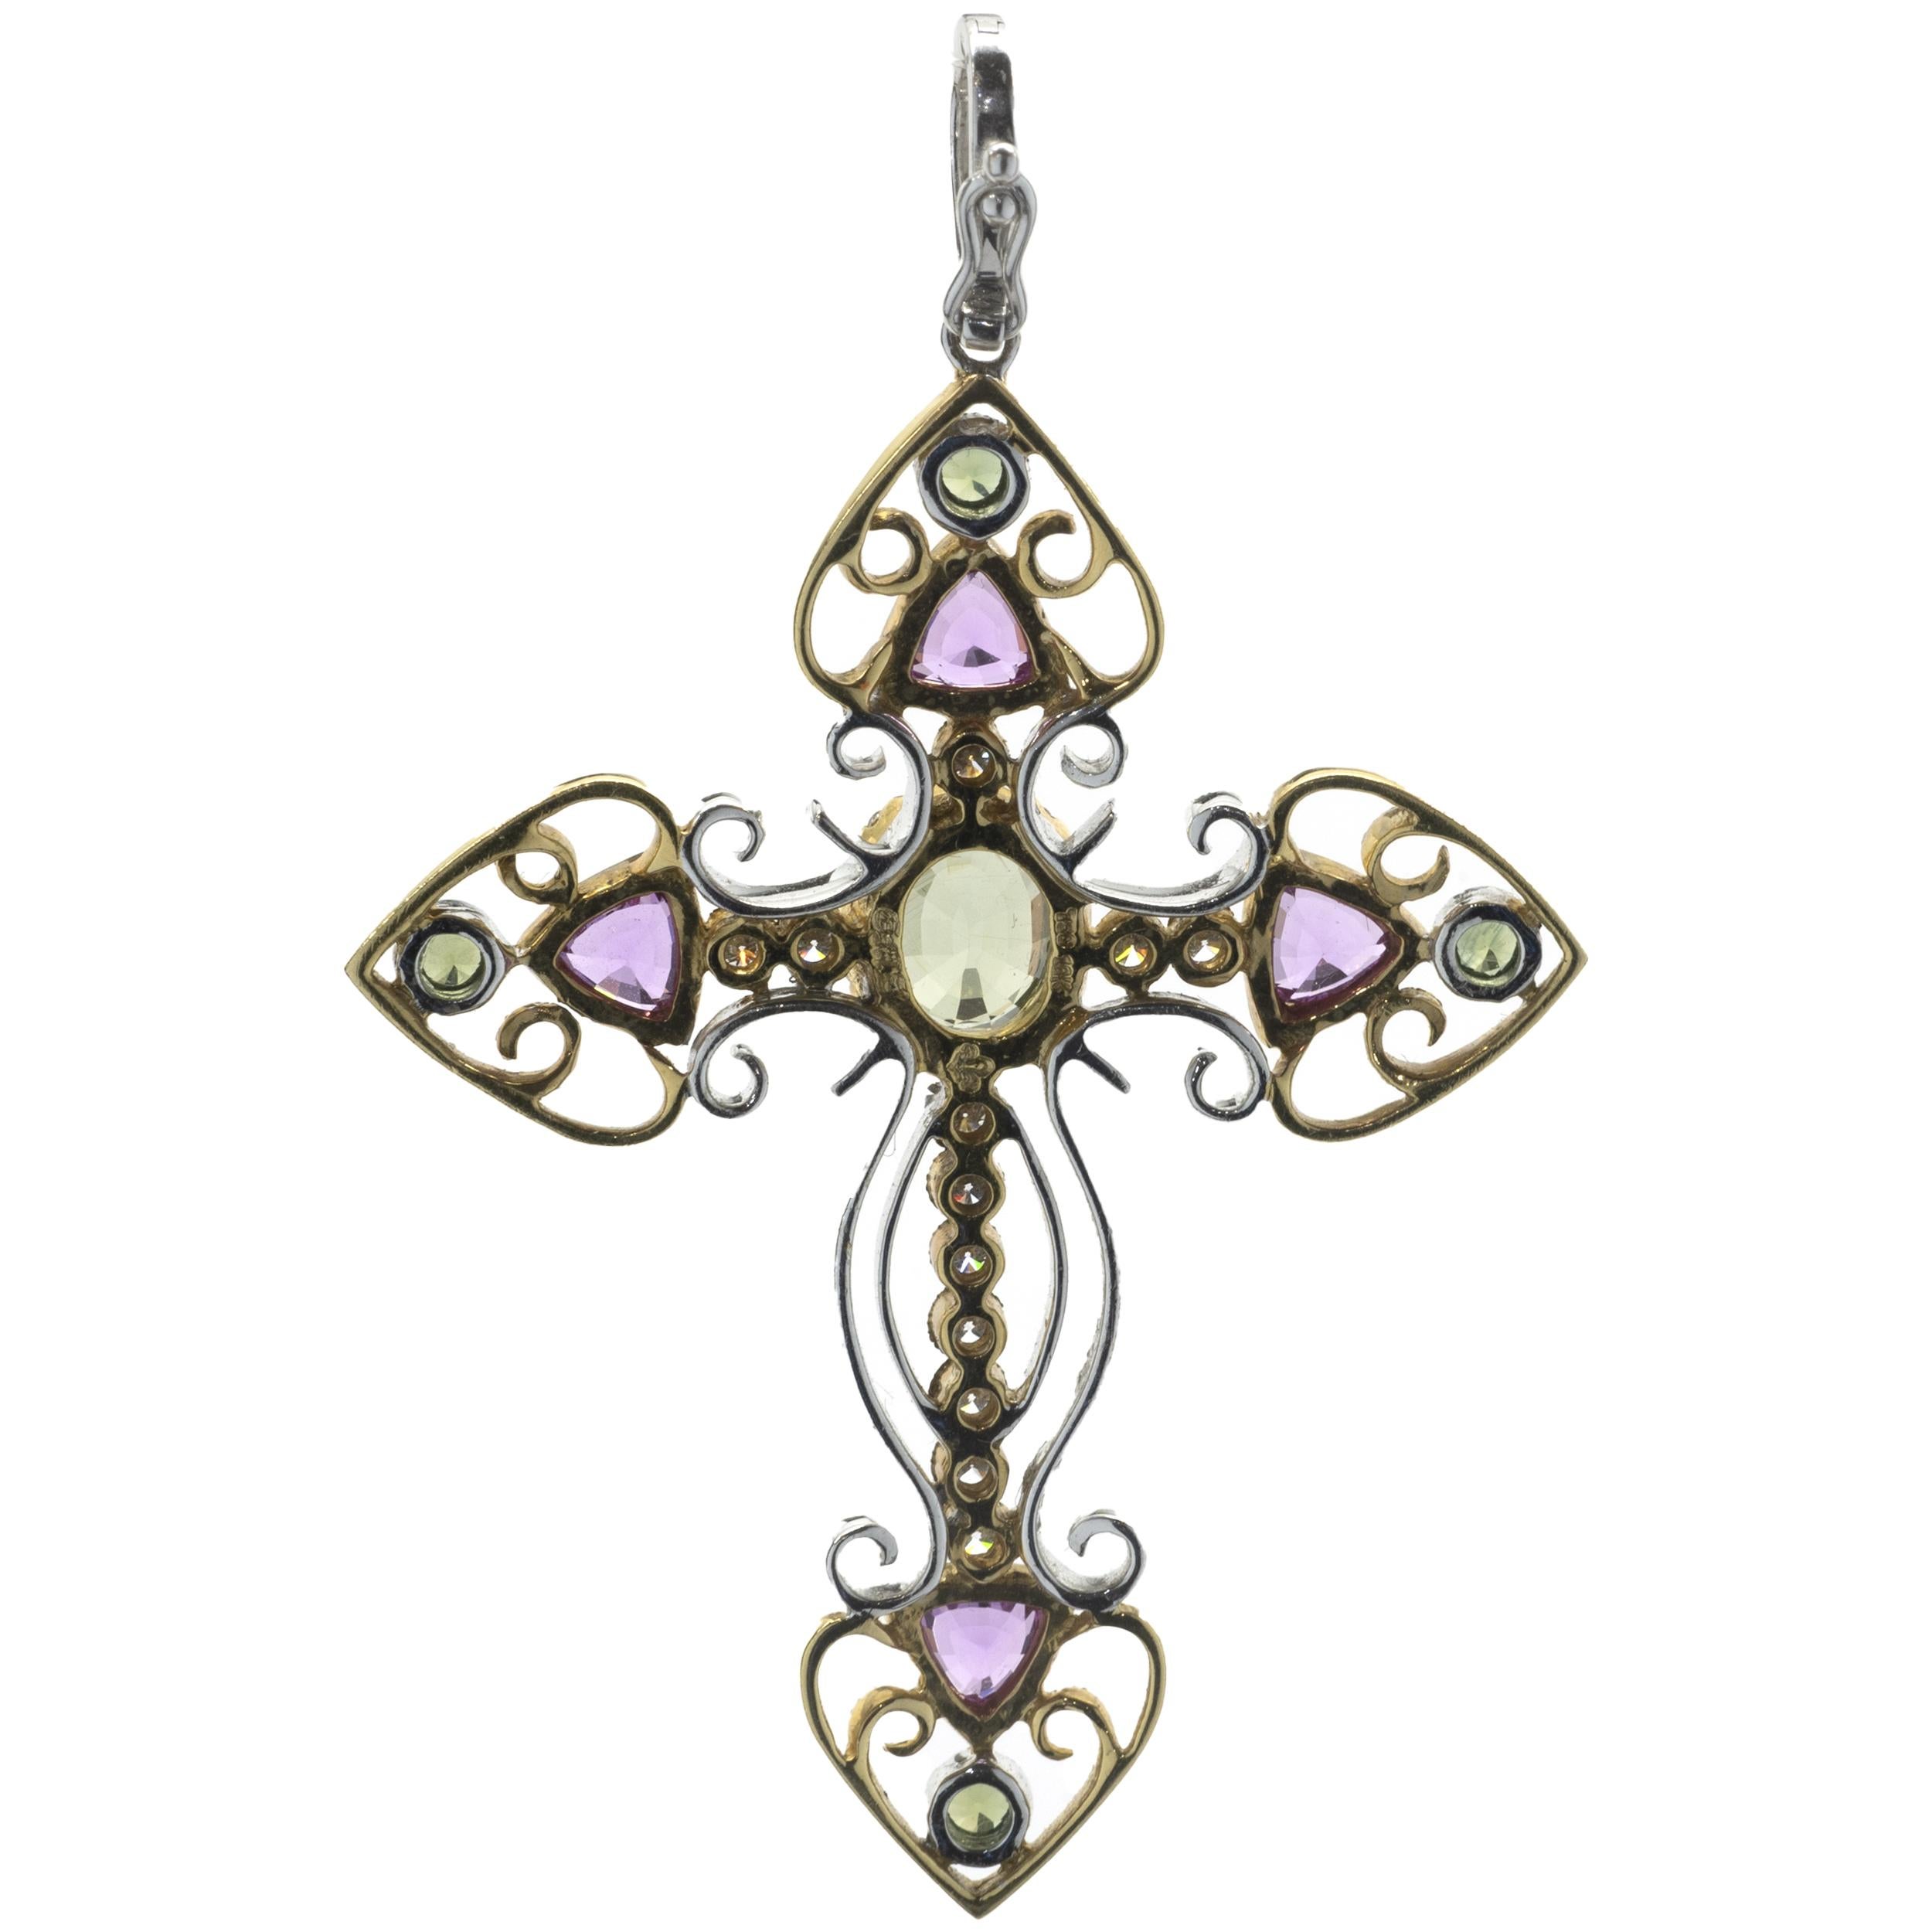 Designer: custom
Material: 18K yellow and white gold
Green Sapphire: 2.35cttw
Pink Sapphire: 1.50cttw
Diamond: 20 round cut = .50cttw
Color: G
Clarity: SI1
Dimensions: pendant measures 60 X 40mm
Weight: 10.63 grams
